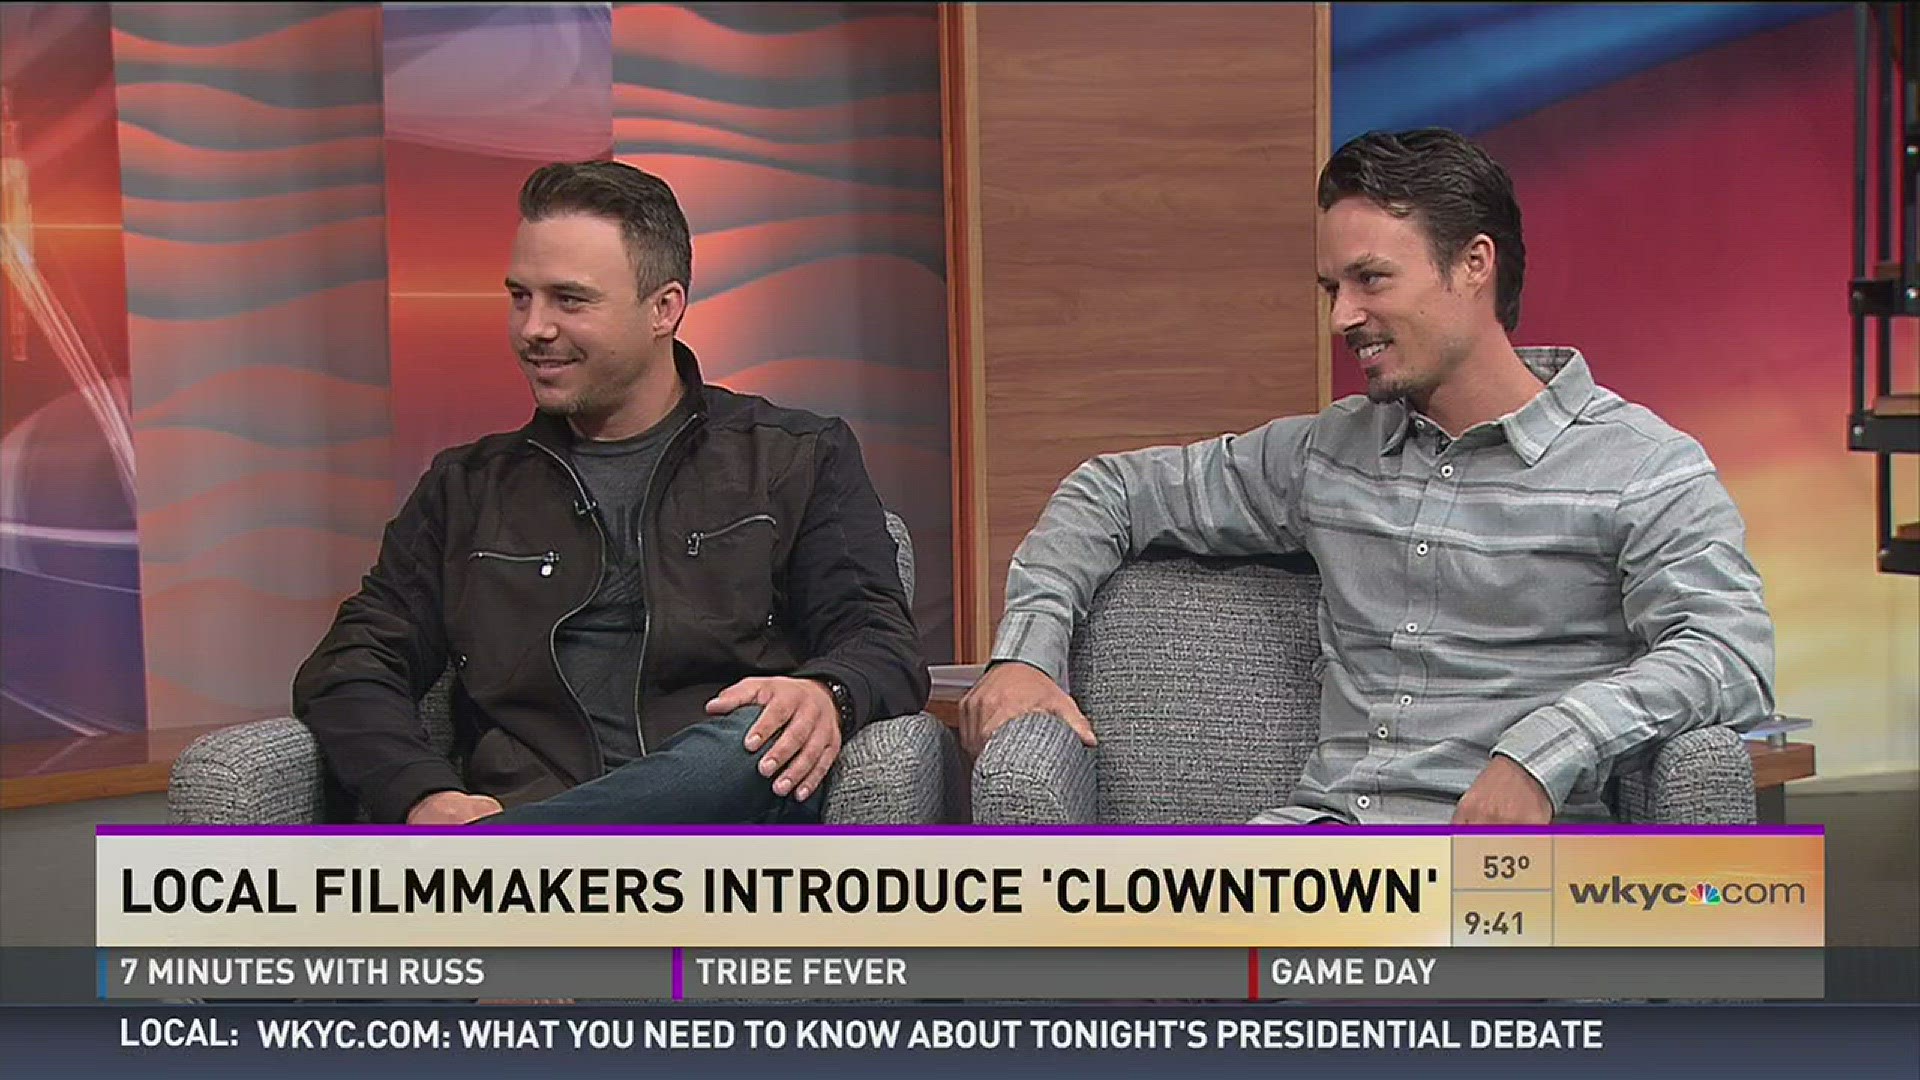 Northeast Ohio filmmakers Introduce "Clowntown" that was filmed in Westlake and Crestline, Ohio. Hear what brothers Tom and Brian Nagel have to say. Catch it Sunday at the Capitol Theater.